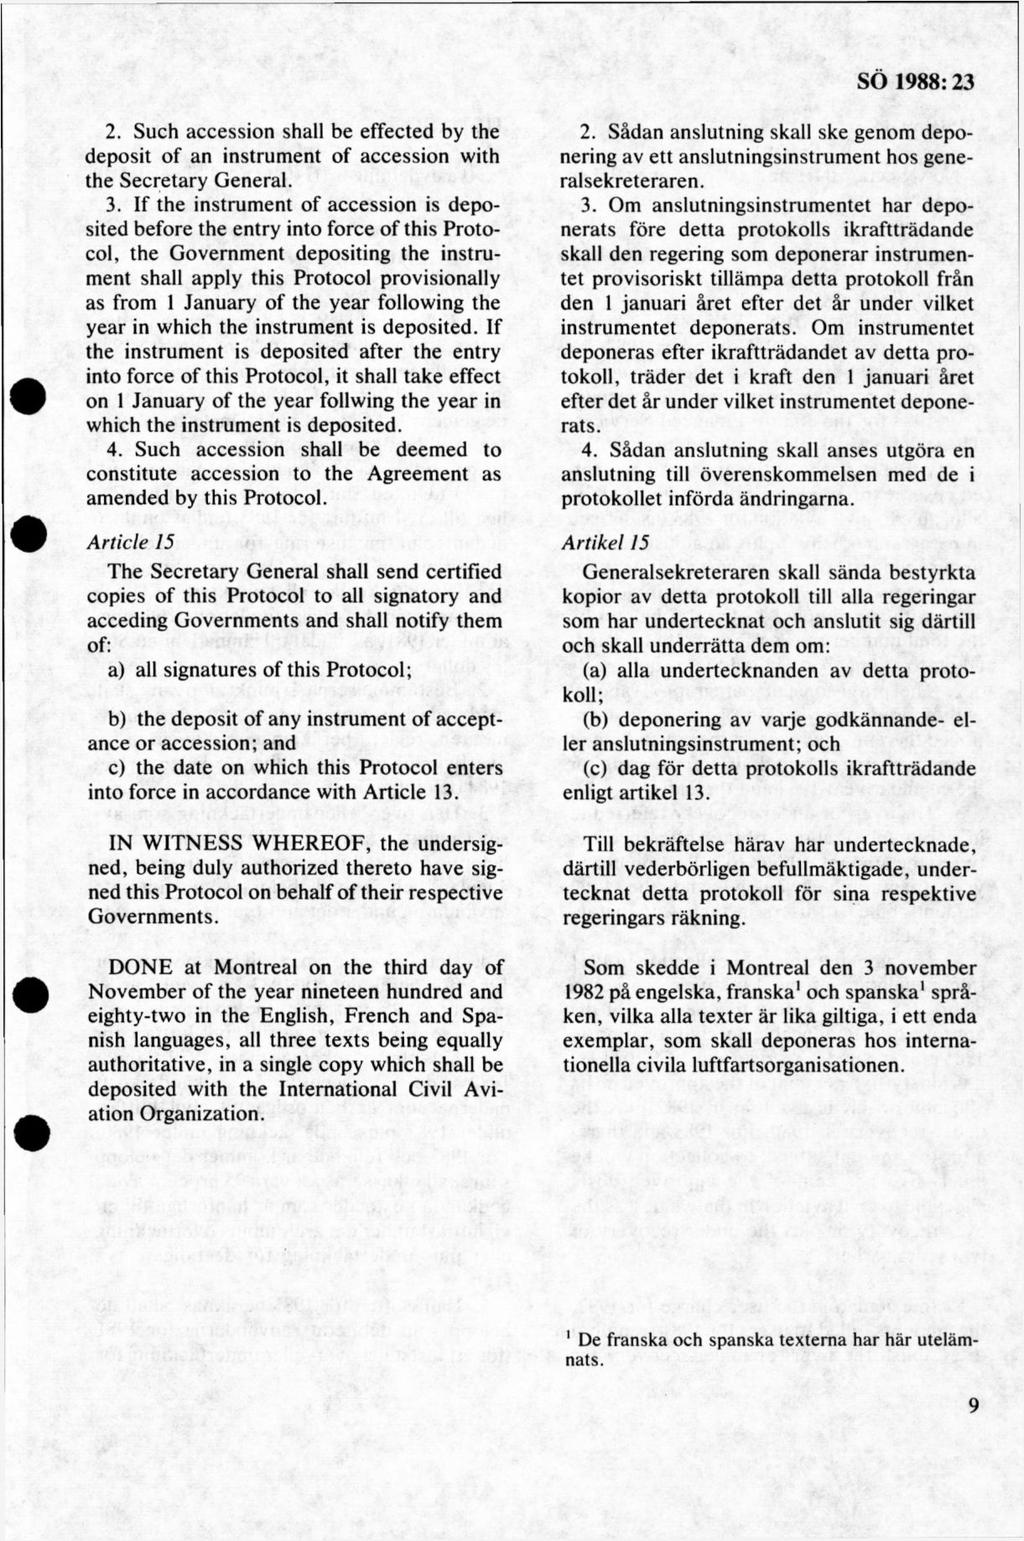 2. Such accession shall be effected by the deposit of an instrument of accession with the Secretary General. 3.